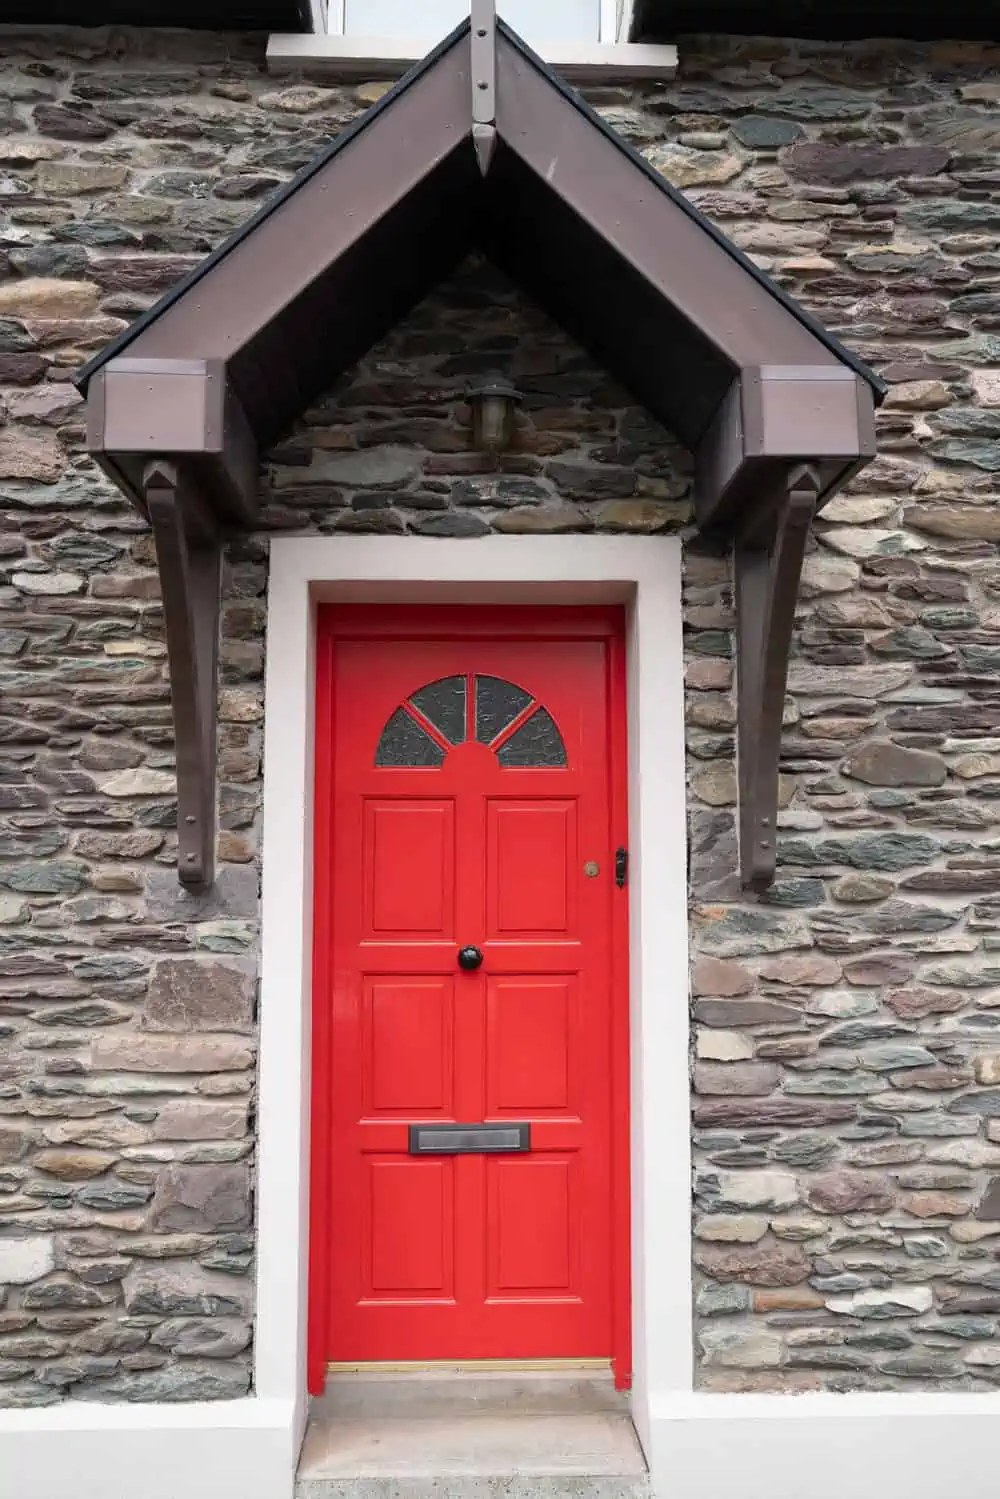 Red door under gable shelter in stone wall